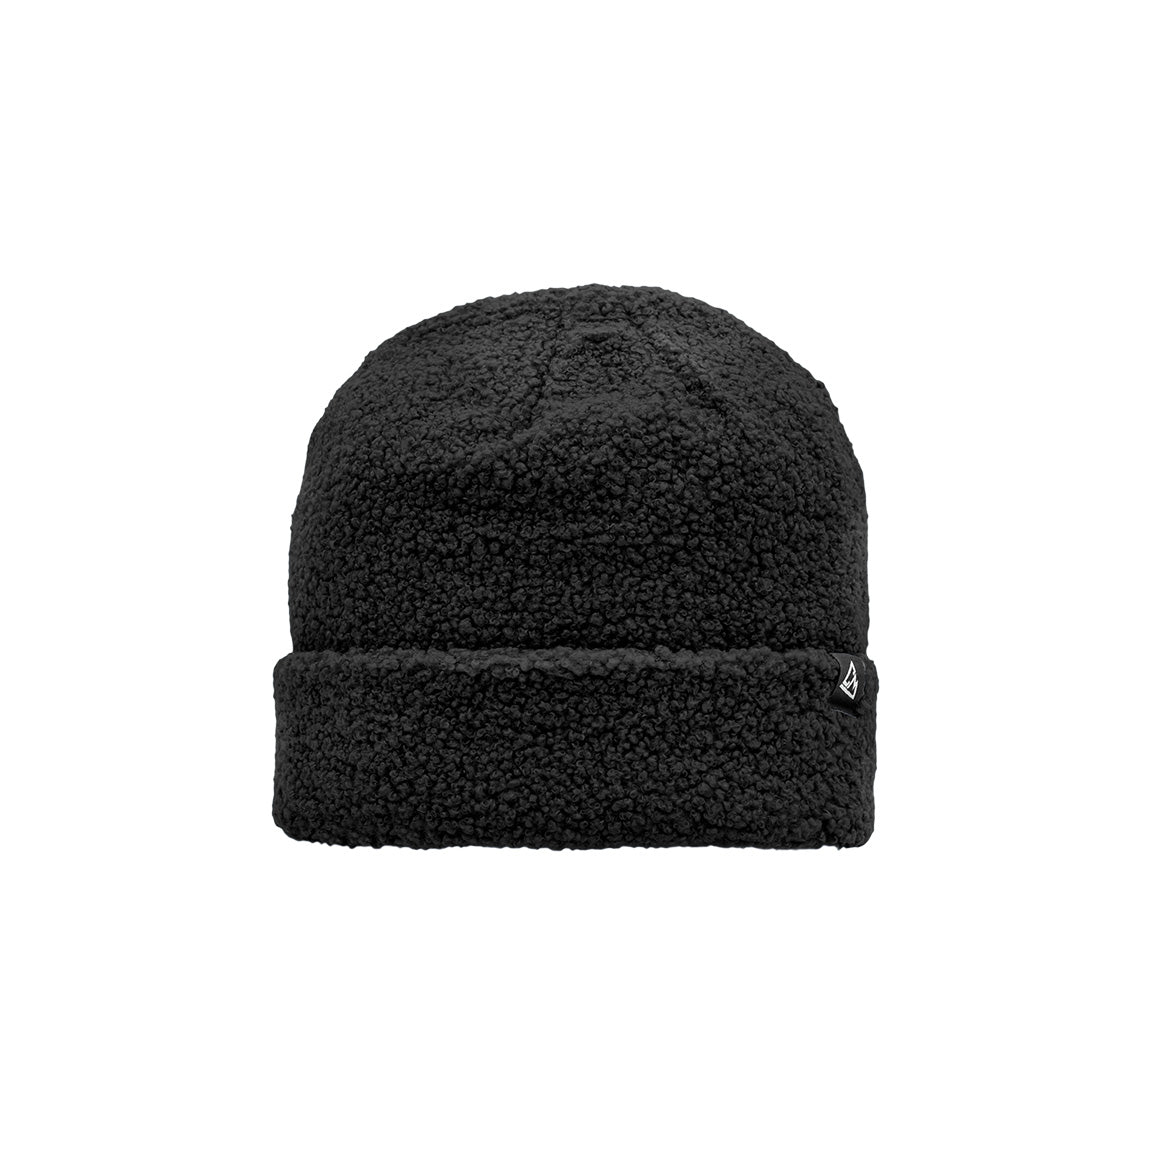 A black sherpa beanie with a soft, textured appearance and a small triangular logo patch on the cuff.